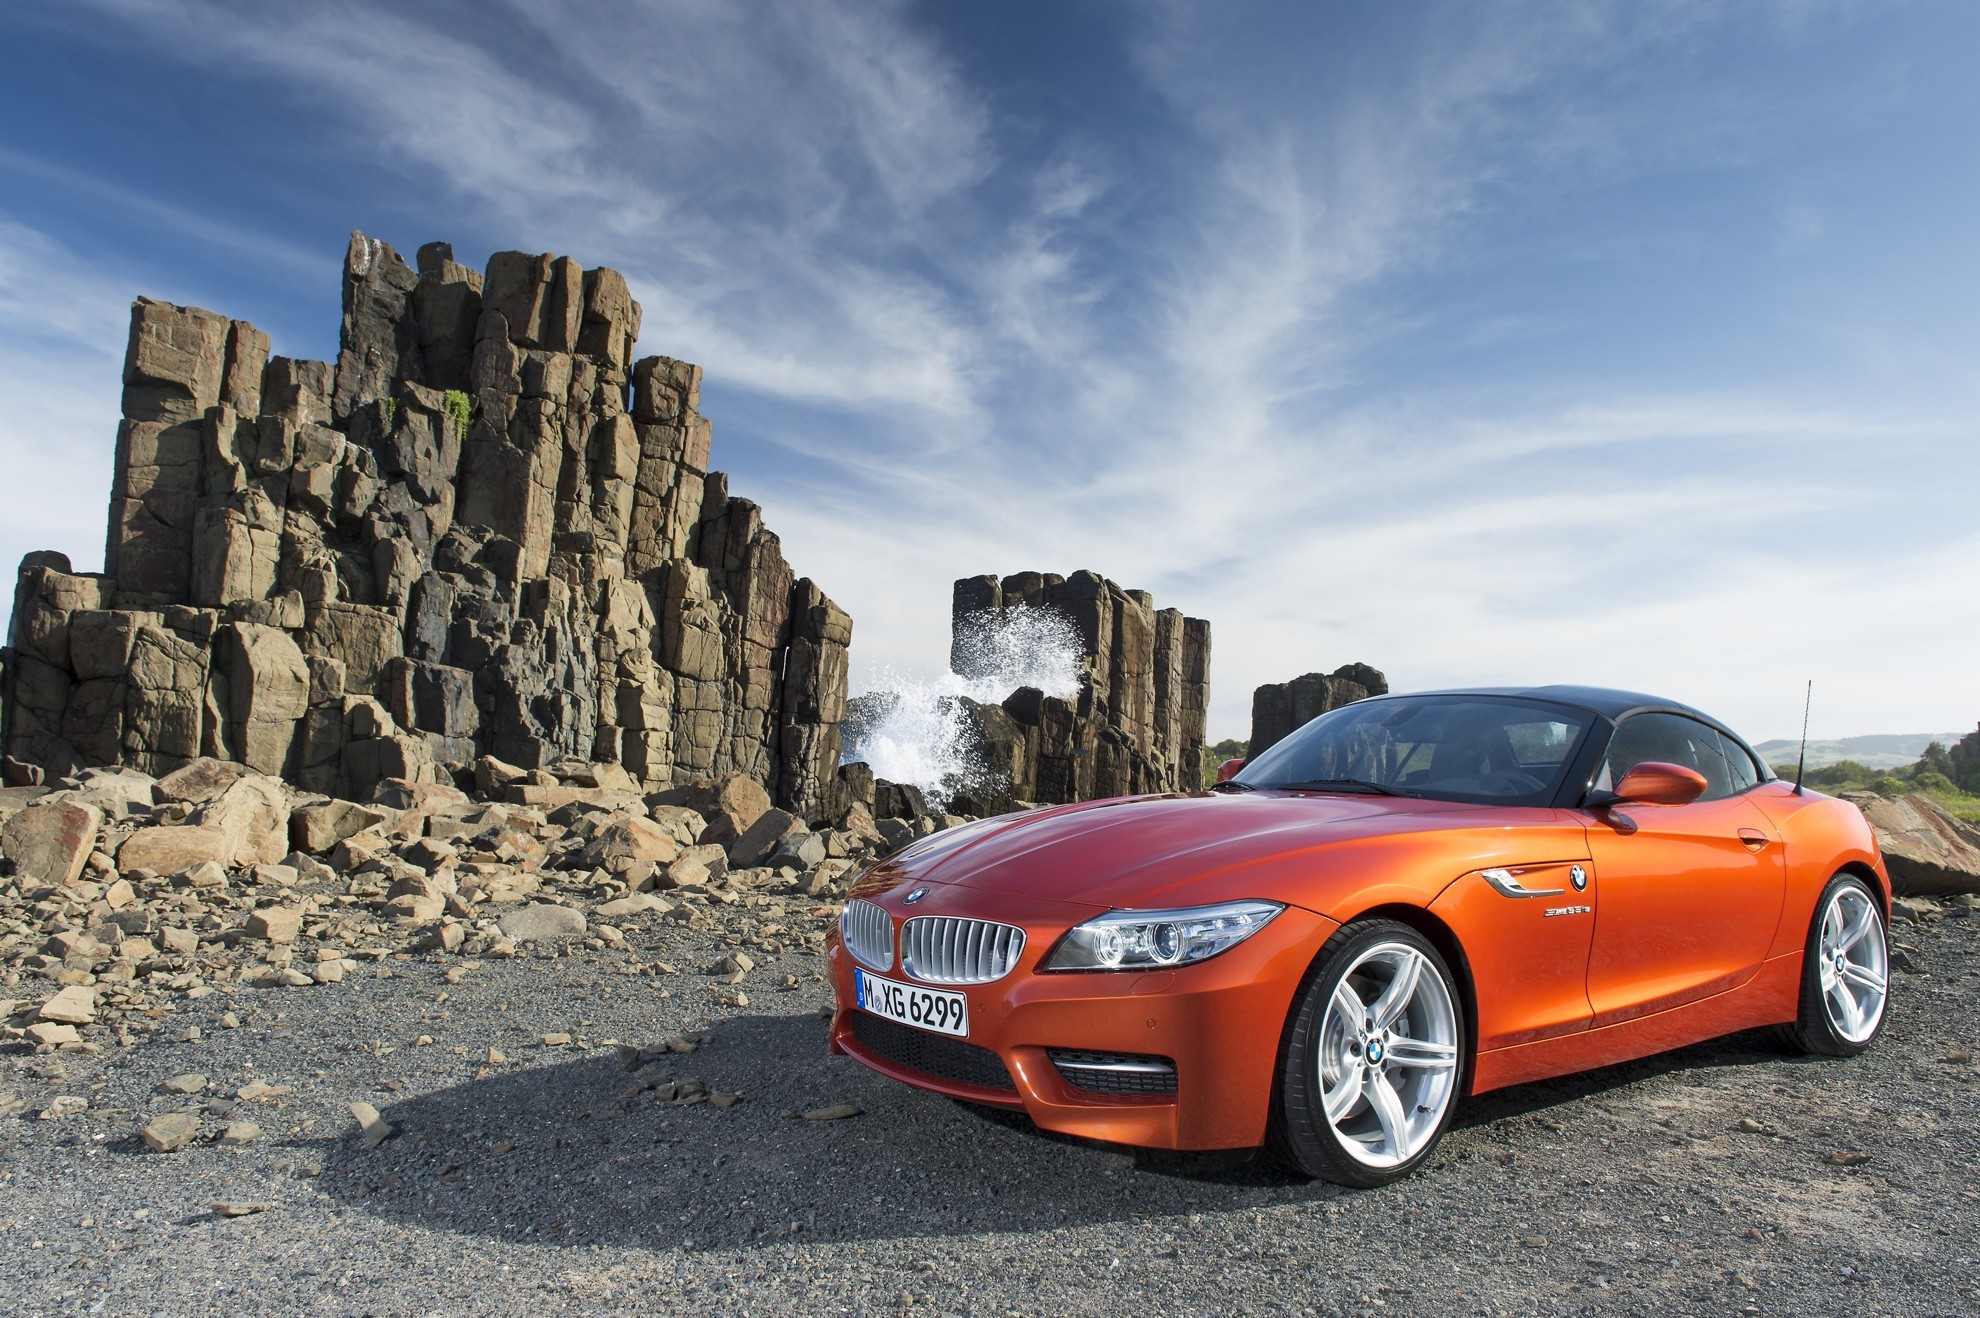 BMW South Africa Top Selling Luxury Car Brand 2012